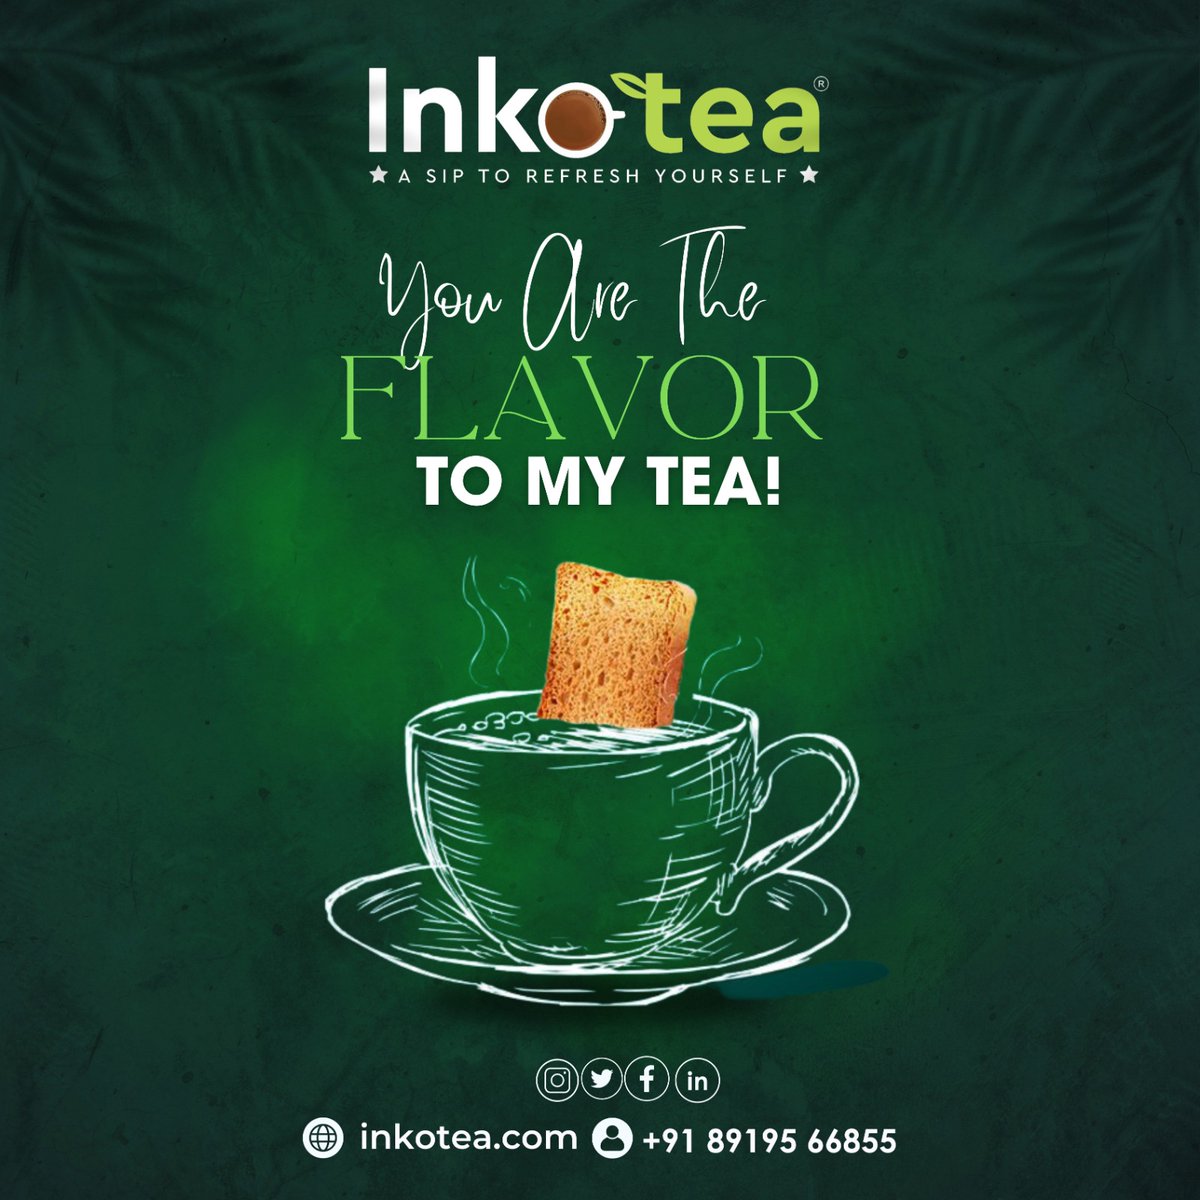 ☕ You are the flavor to my tea in InkoTea! 

🍵✨ With each sip, I savor the sweetness of your presence, the warmth of your love, and the comfort of your companionship. 
#InkoTeaLove #SoulmatesInACup #TeaTimeBliss #Inkotea #Gingertea #SavorTheSip #TeaFlavors #TeaExploration #Tea